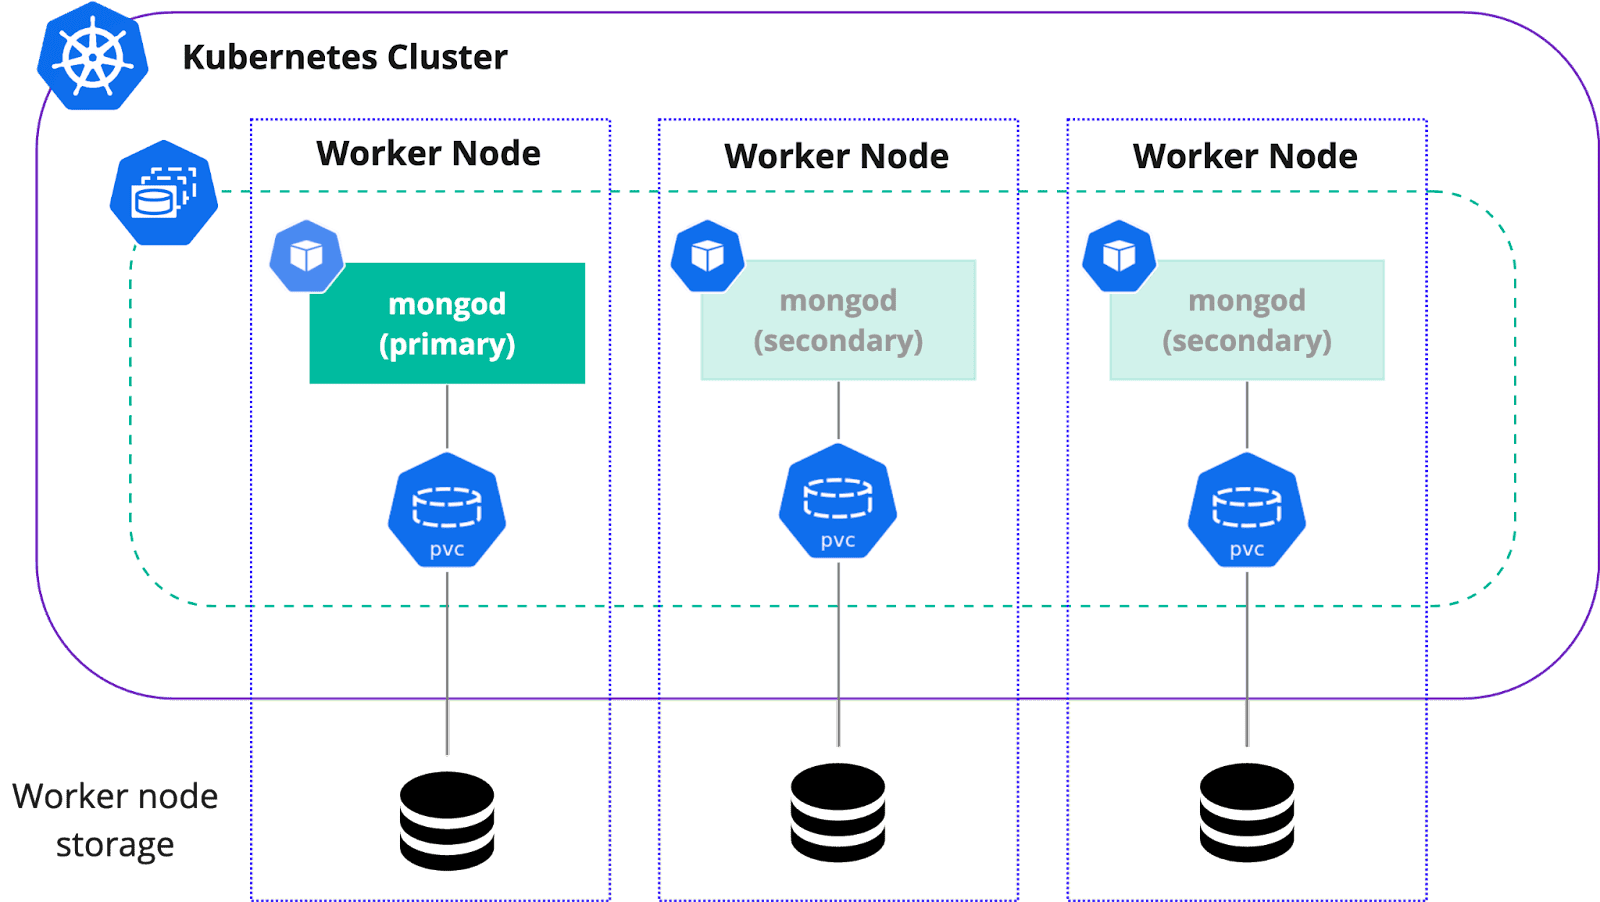 Diagram flow showing Kubernetes Cluster architecture on local storage